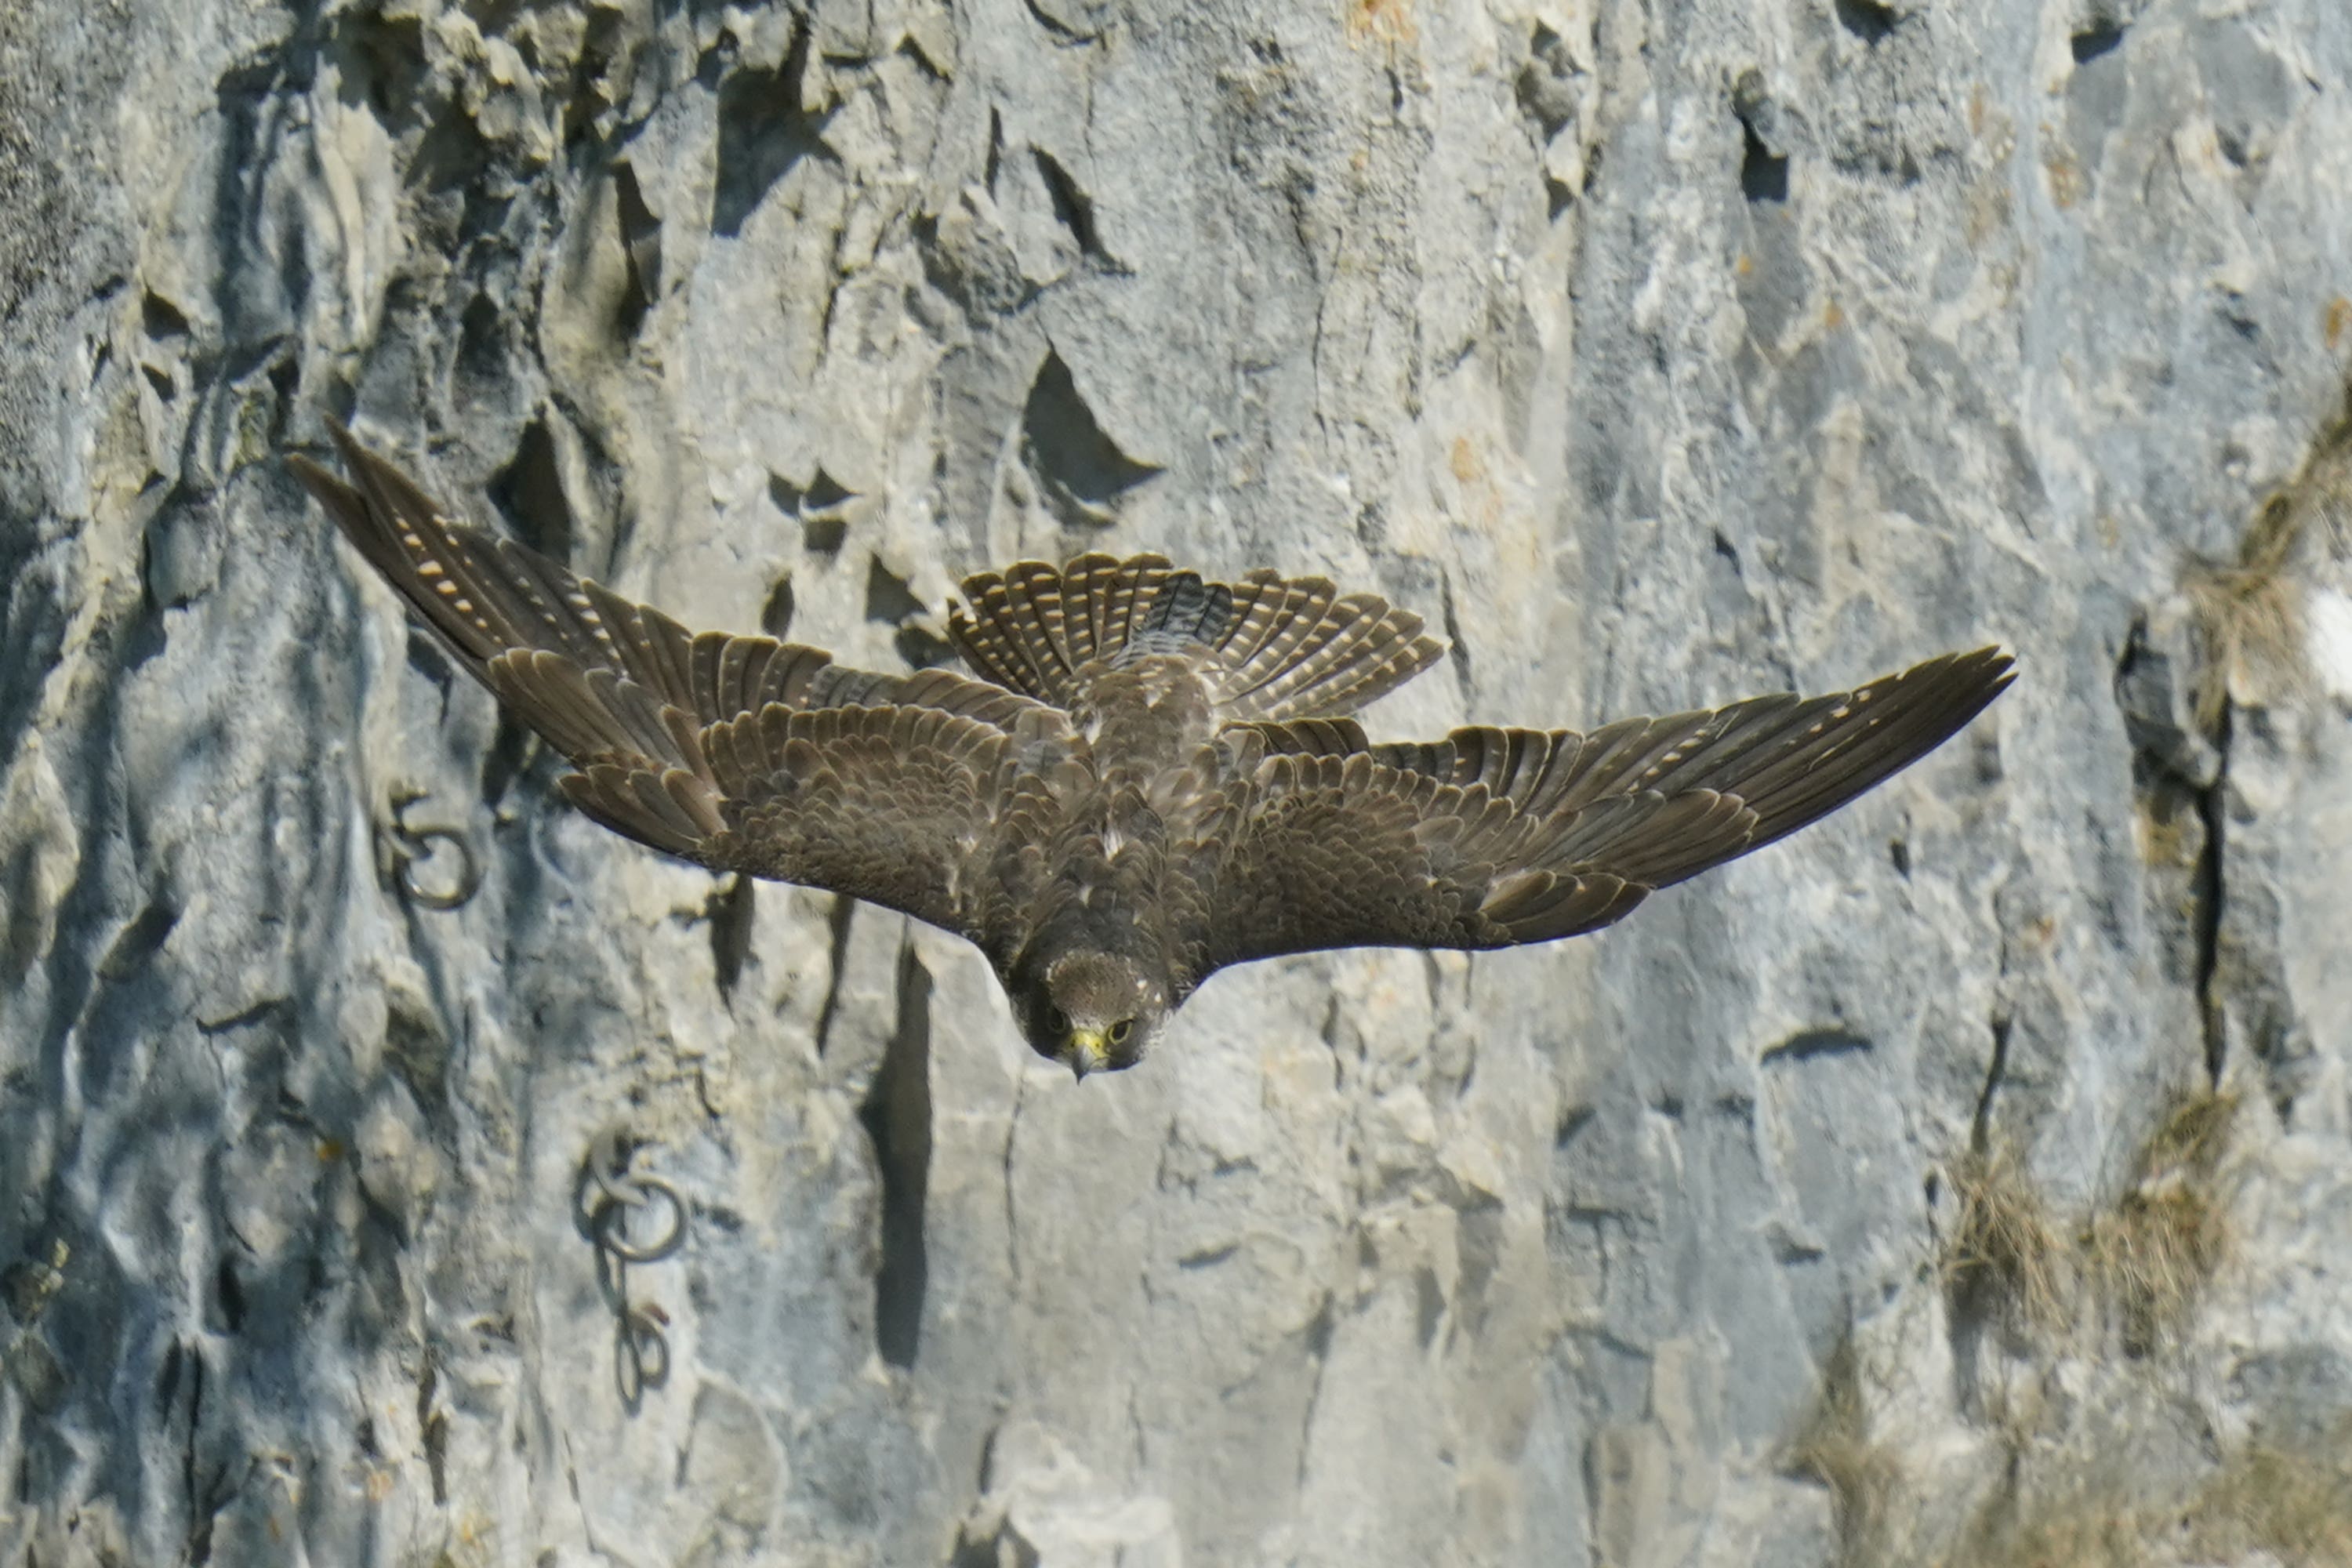 A peregrine falcon at Malham Cove, in the Yorkshire Dales National Park (Danny Lawson/PA)